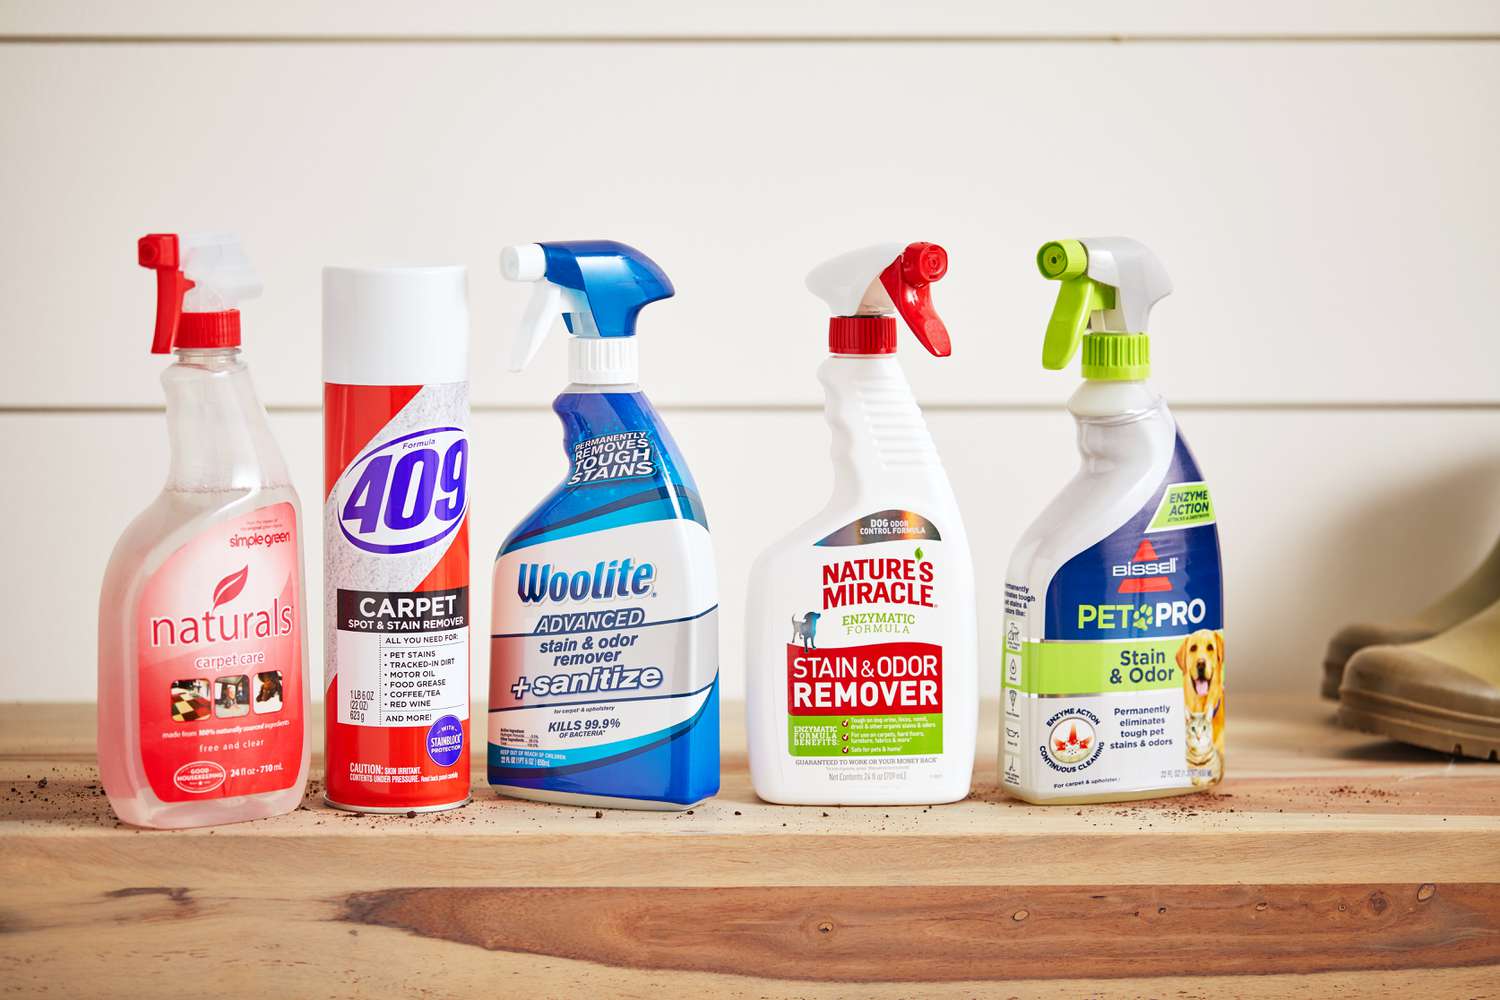 Carpets cleaning supplies